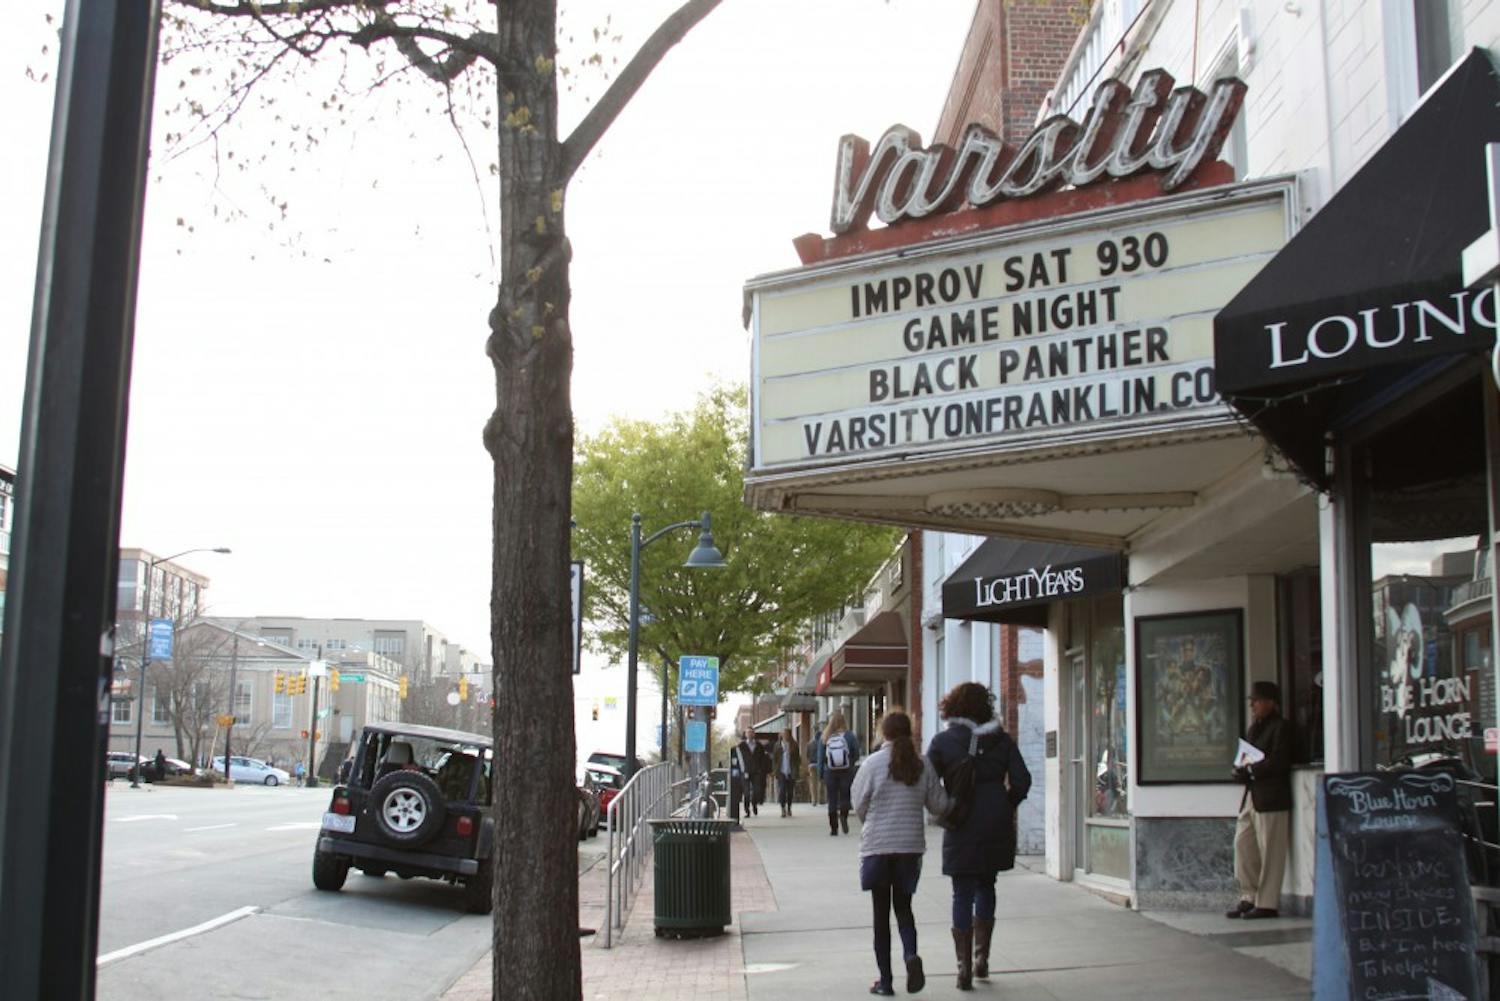 Black Panther, a recent blockbuster hit, is now showing at the Varsity movie theater on Franklin Street.